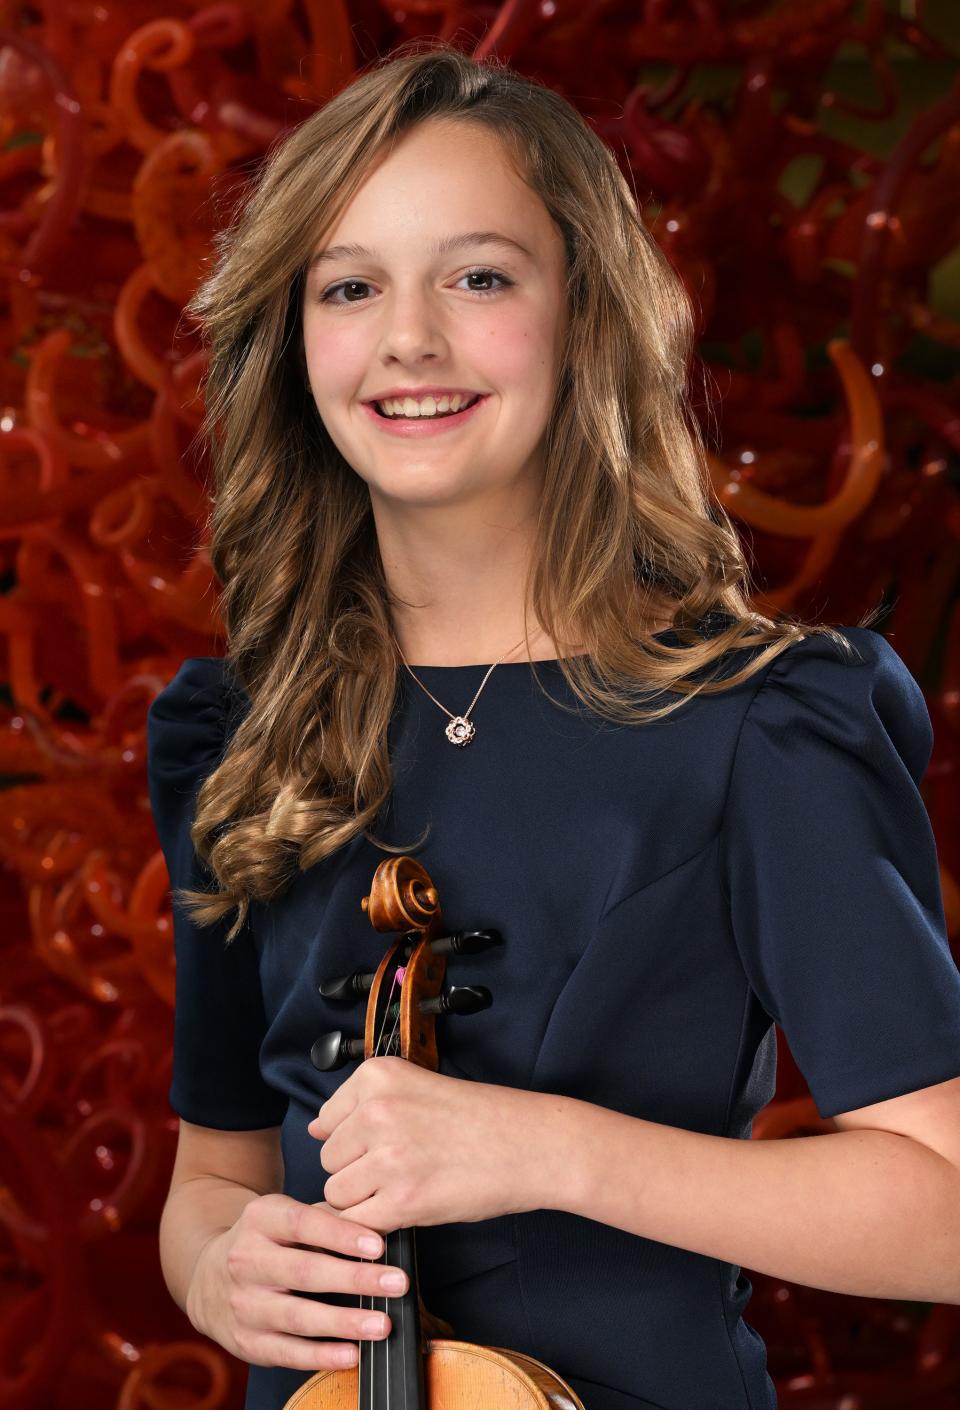 Sophie Wilkes, violinist, poses for photos for the 2023 Salute to Youth Portraits at Abravanel Hall in Salt Lake City on Wednesday, Oct. 4, 2023. | Scott G Winterton, Deseret News